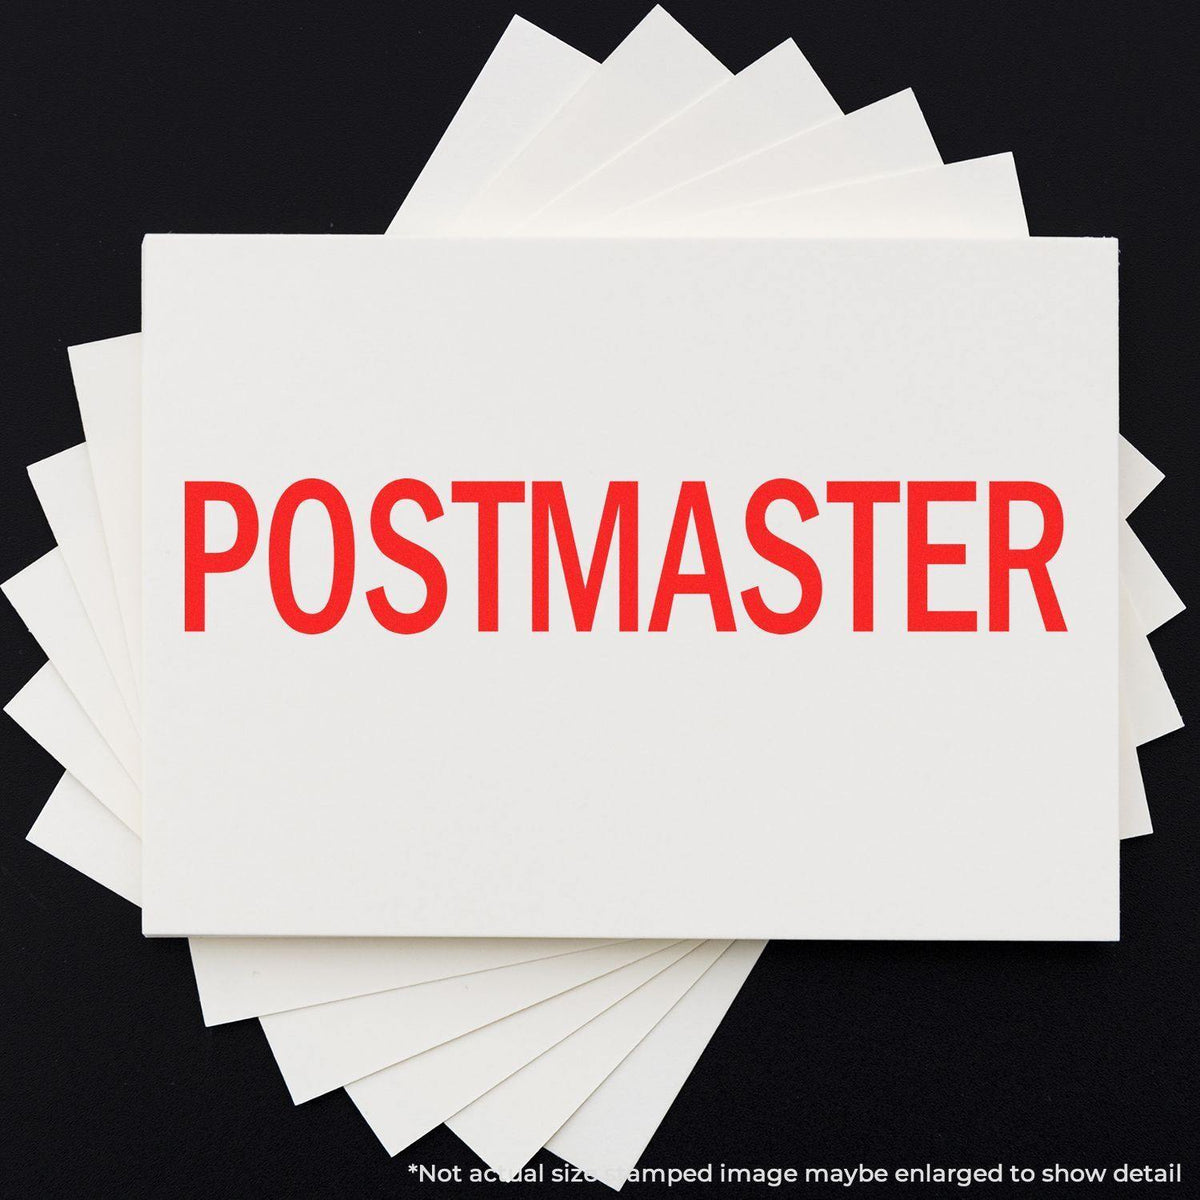 Postmaster Rubber Stamp - Engineer Seal Stamps - Brand_Acorn, Impression Size_Small, Stamp Type_Regular Stamp, Type of Use_General, Type of Use_Office, Type of Use_Postal